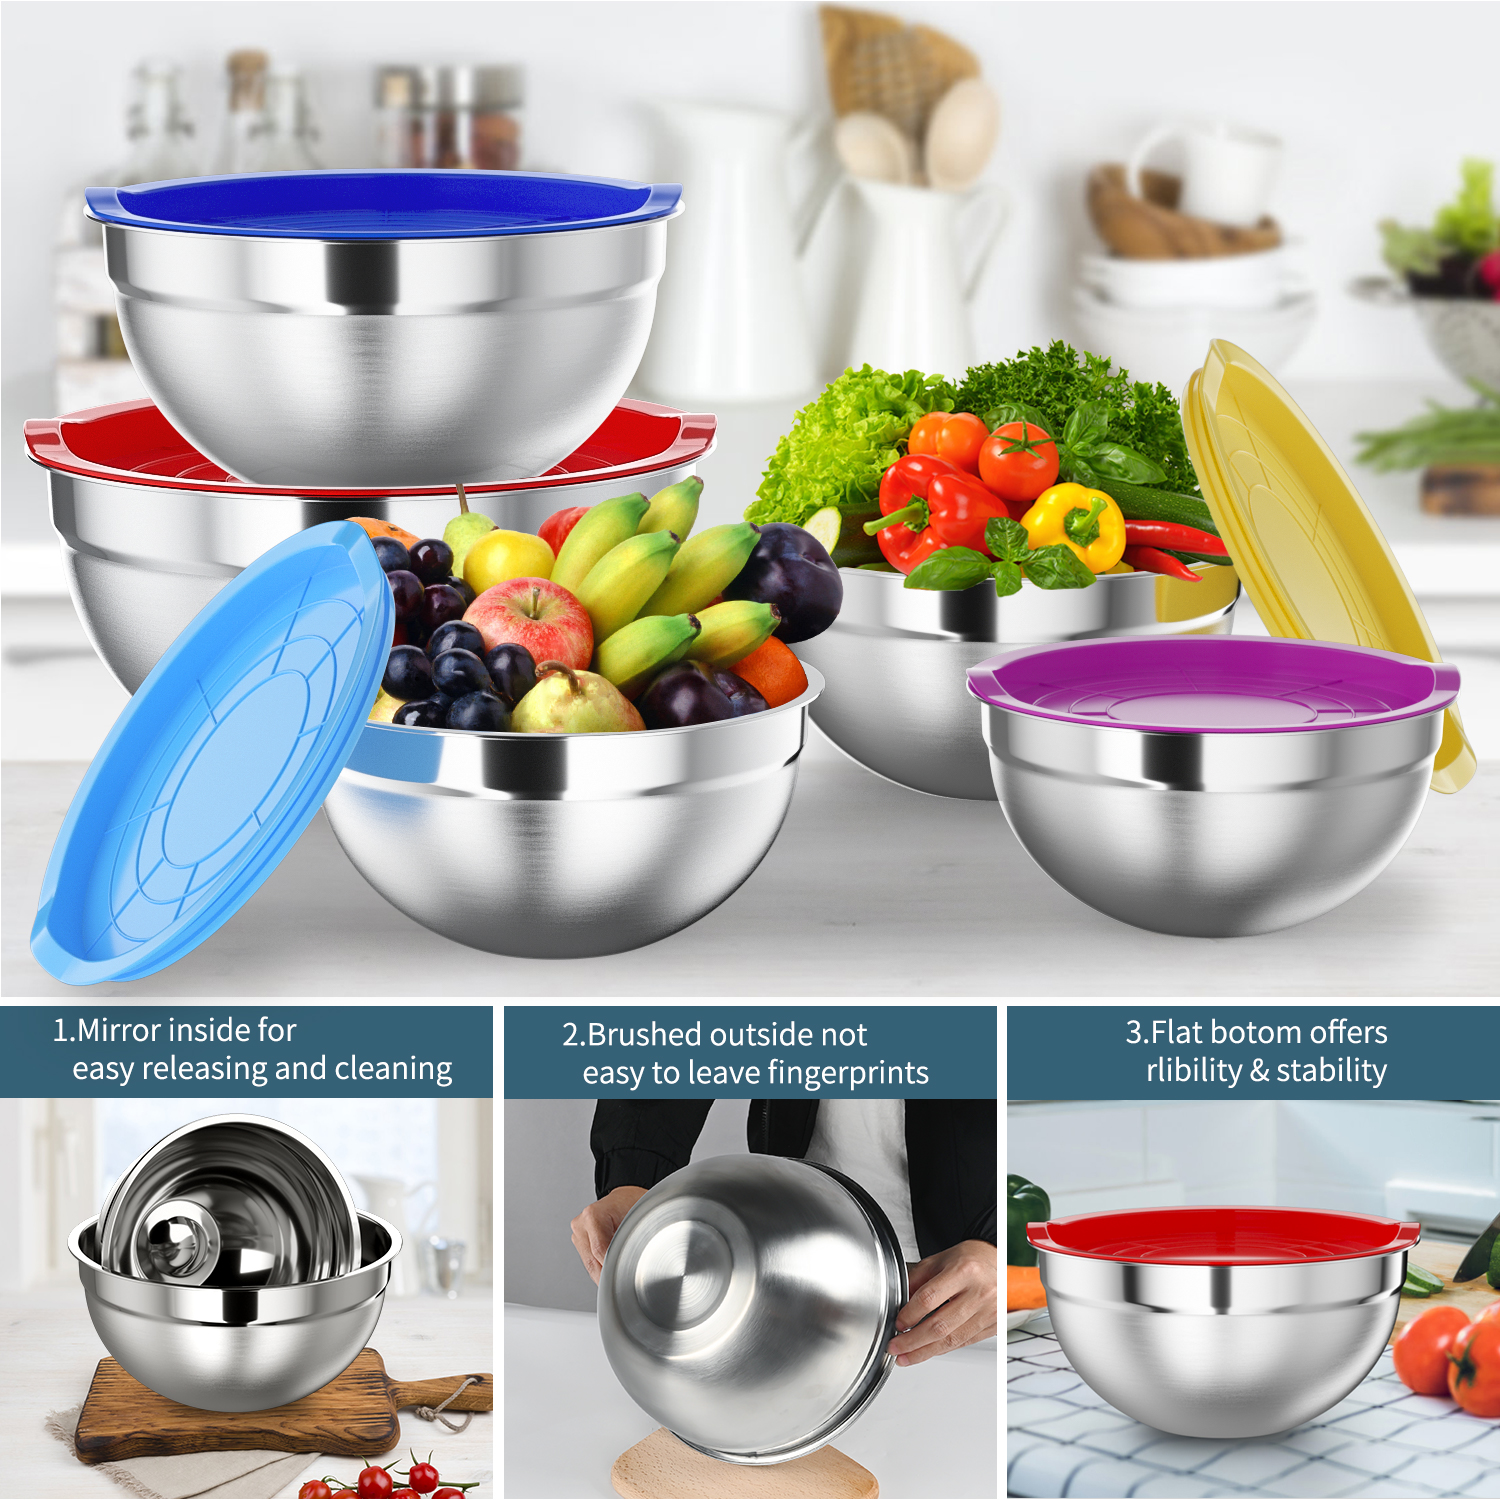 TINANA Mixing Bowls with Lids: Stainless Steel Mixing Bowls Set - 7PCS Metal Nesting Mixing Bowls for Kitchen, Size 7, 4.5, 3, 2, 1.5, 1, 0.7 QT, Great for Prep, Baking, Serving-Multi-Color - image 5 of 7